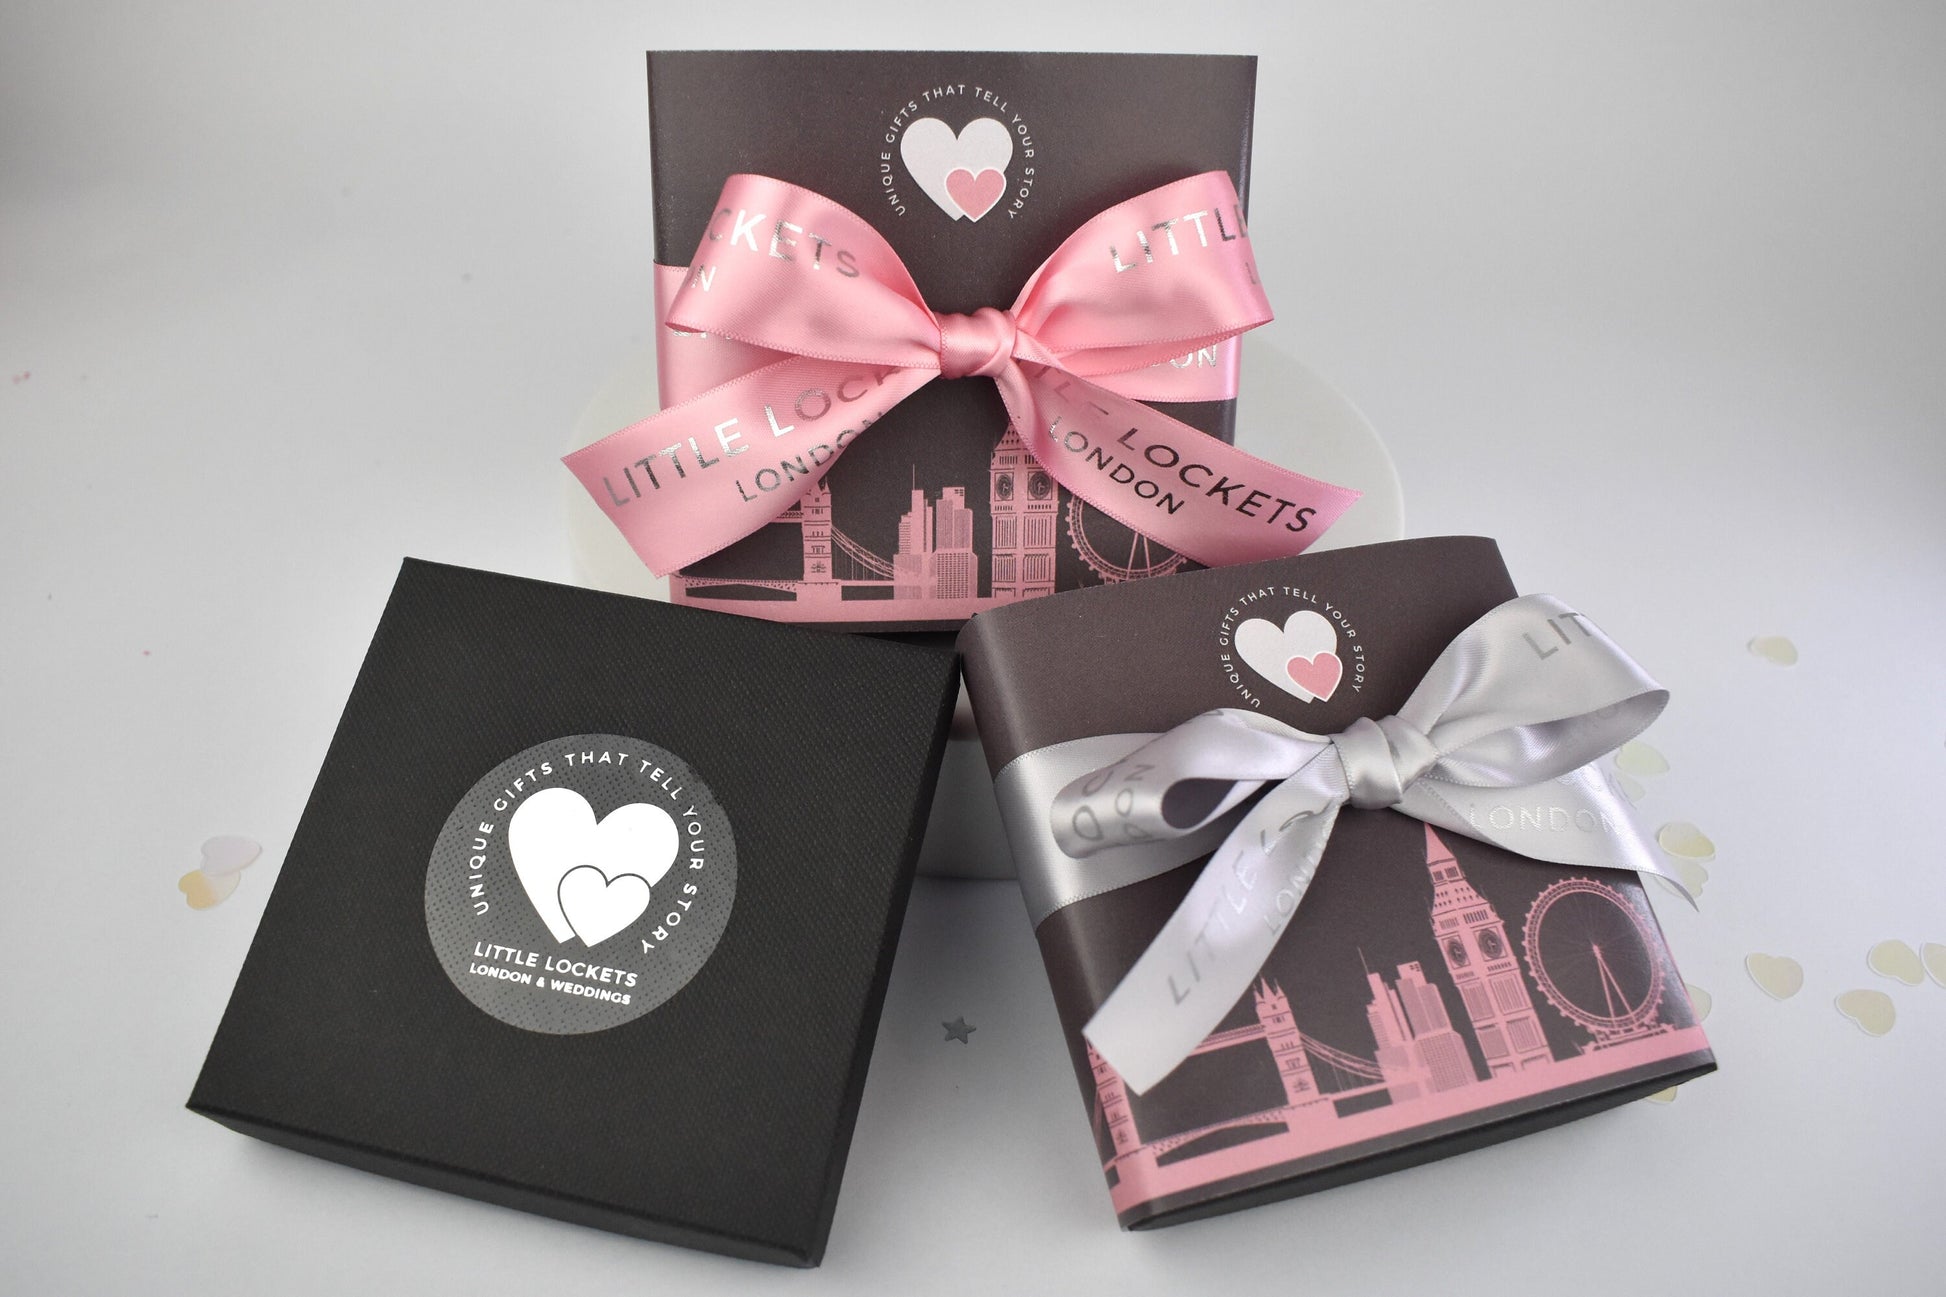 Your choice of gift wrap - free logo box or upgrade to a London wrap and ribbon tie